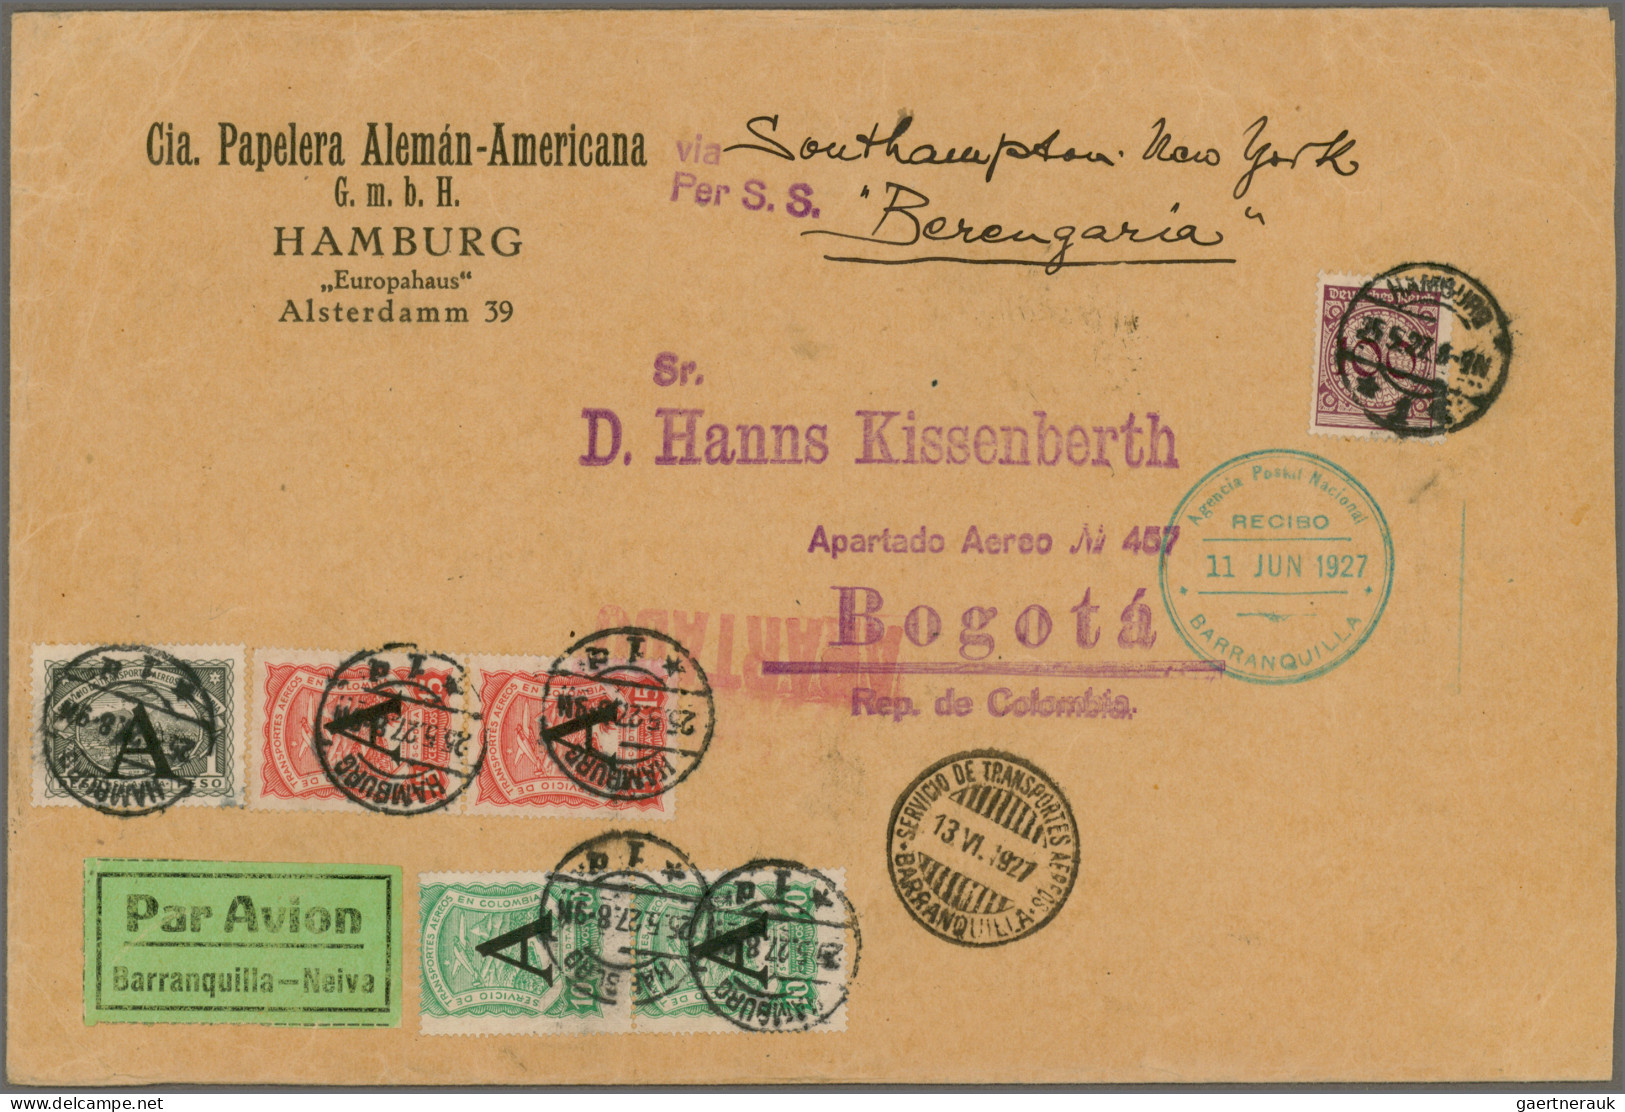 SCADTA: 1927, Commercial Cover With Franking Germany 10pfg. Violet And Scadta "A - Airplanes